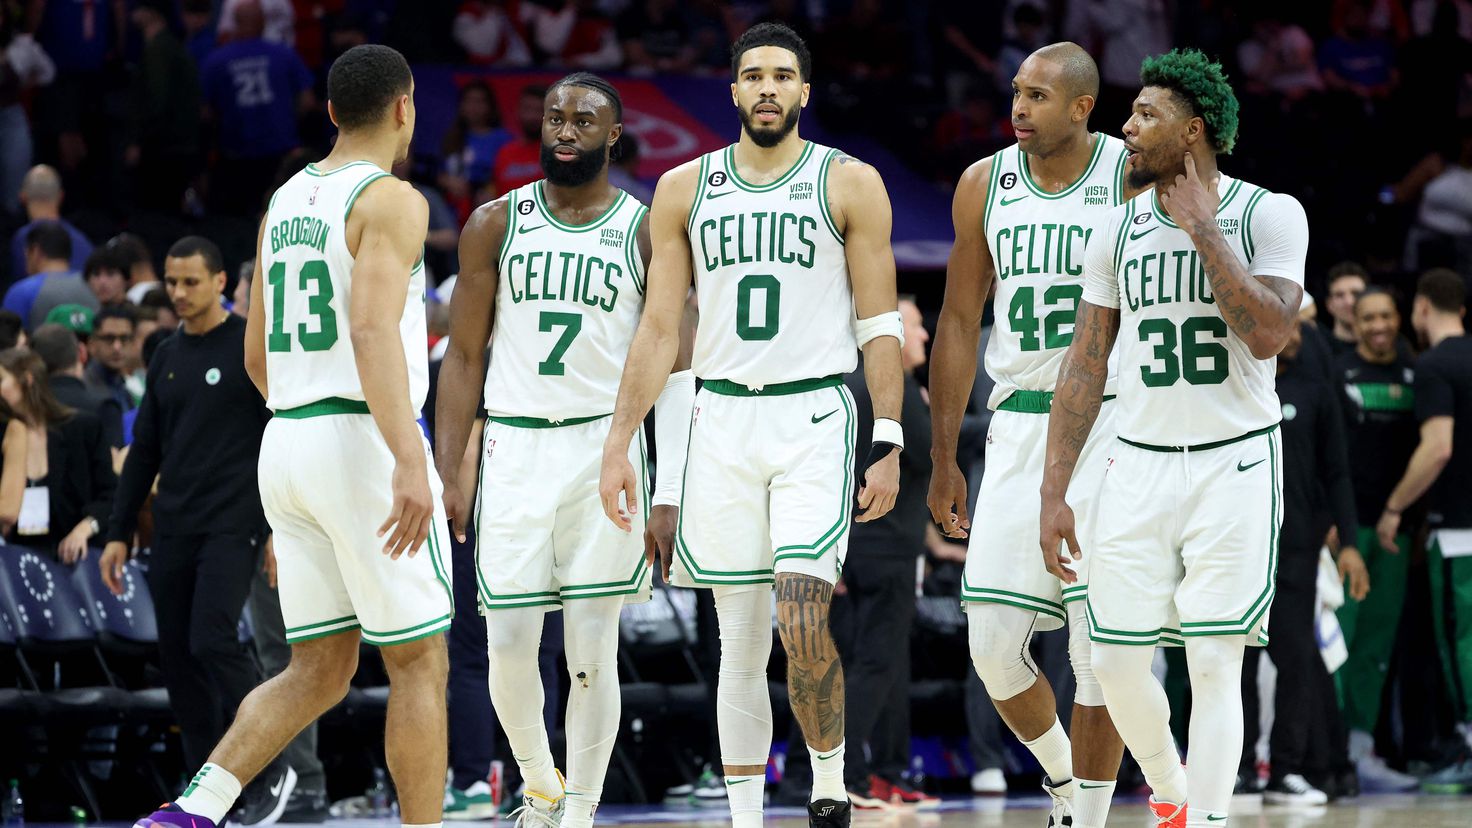  Celtics player has played with a torn arm in the series vs.  Miami Heat
